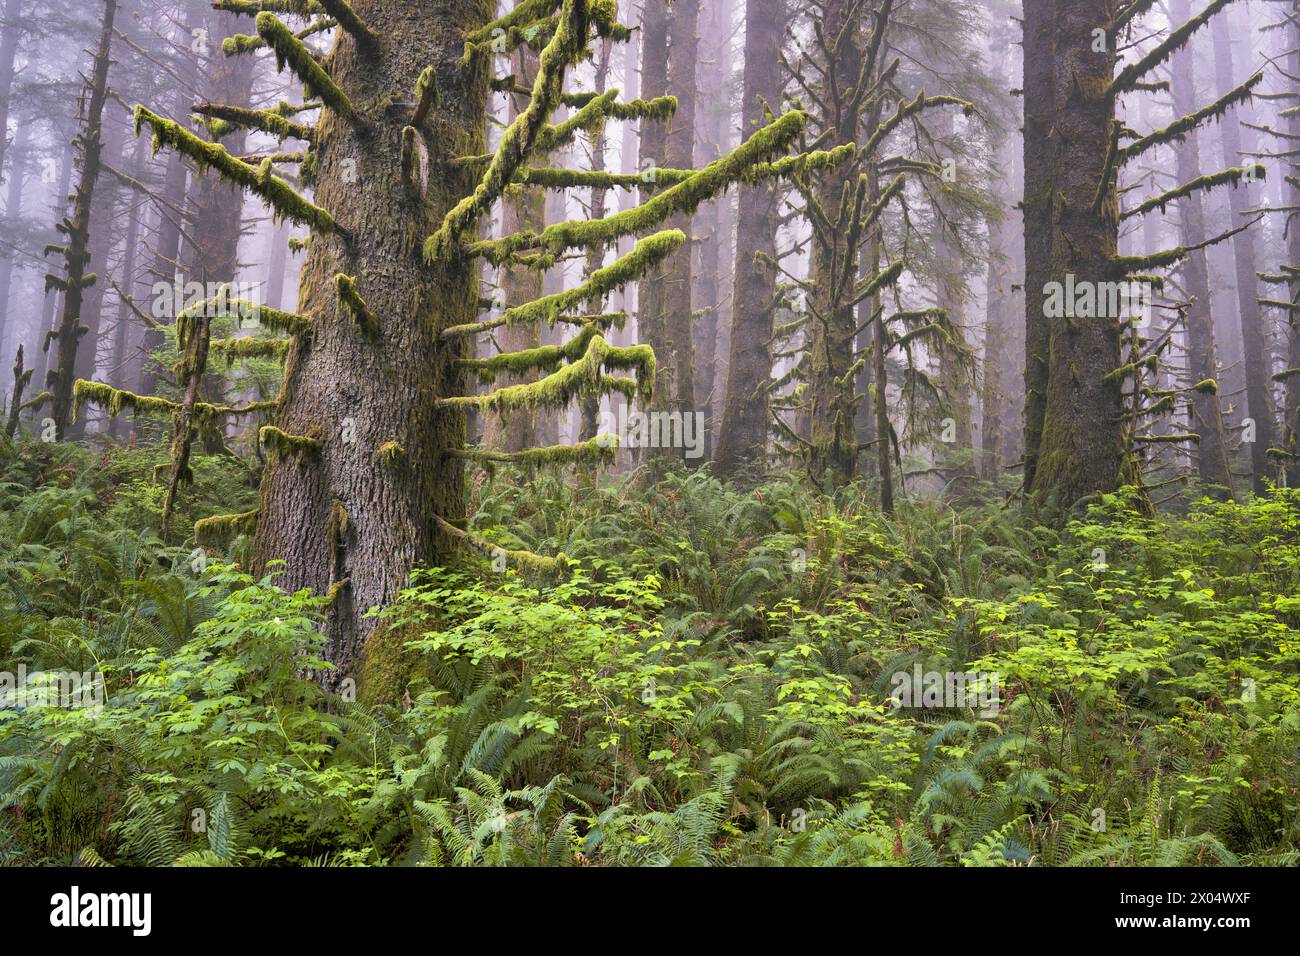 Lifting of spring fog reveals these large Sitka spruce trees with thick moss clinging to the branches at the entance to California's Redwood National Stock Photo